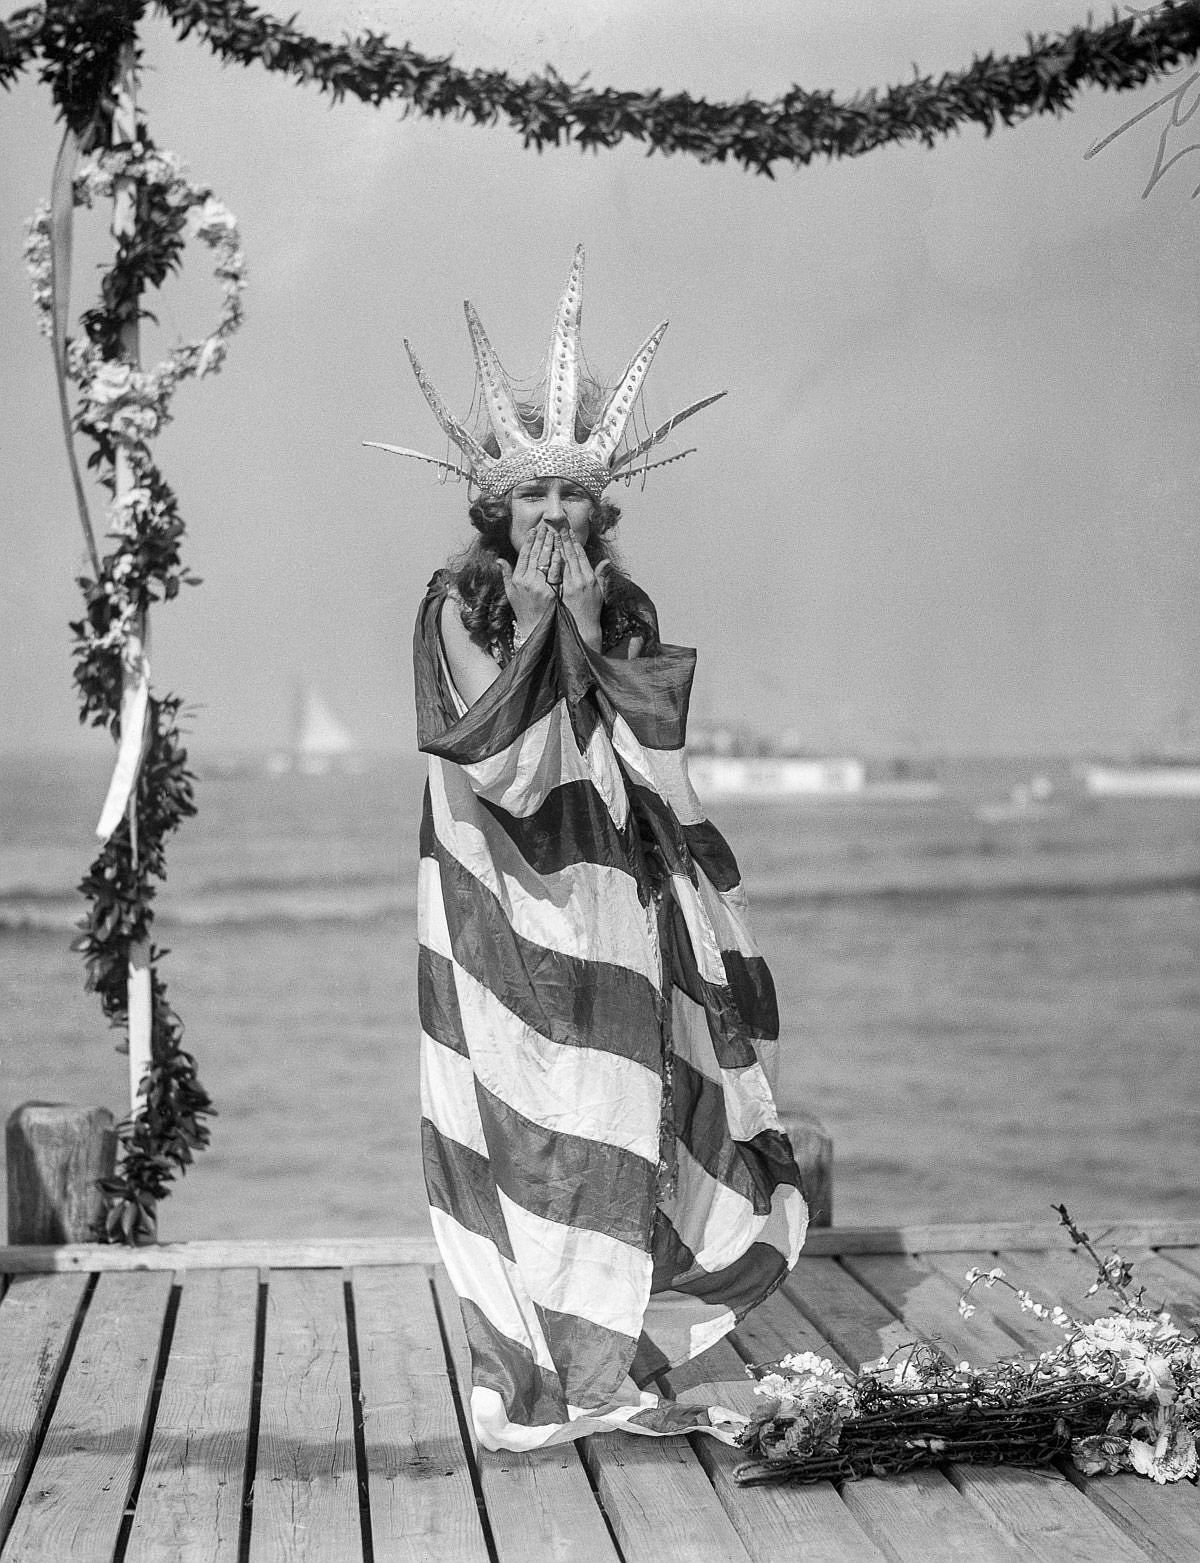 Sept. 7, 1922 - Margaret Gorman, the newly crowned Miss America, awaits the arrival of Neptune in her royal robes at the opening of the Atlantic City Beauty Pageant.